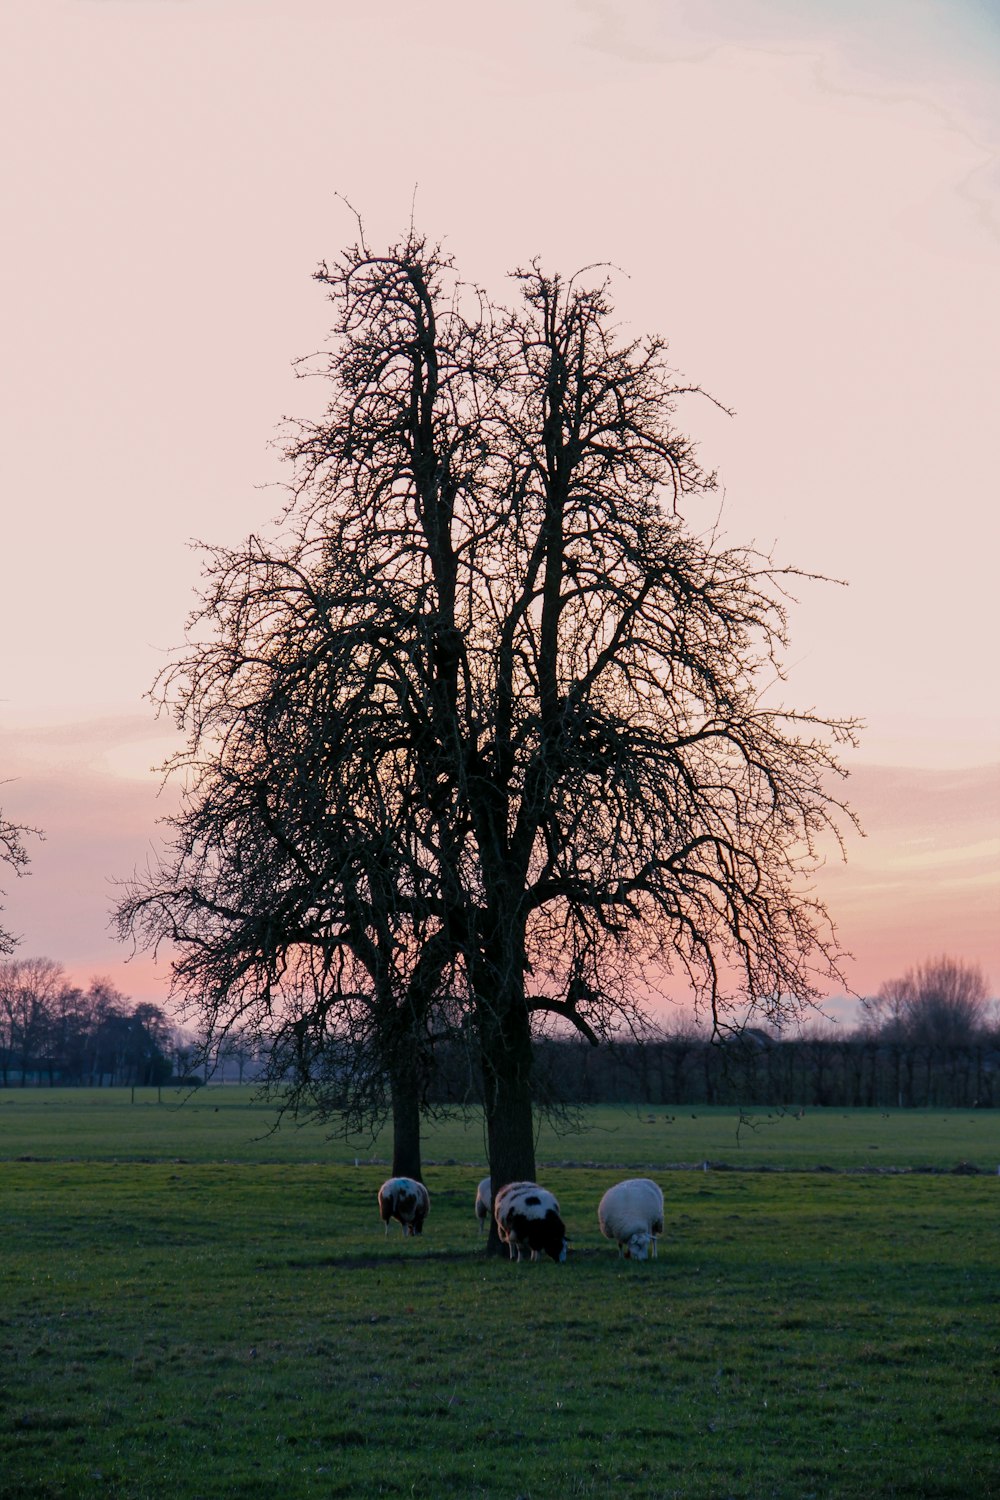 a group of sheep grazing in a field under a tree